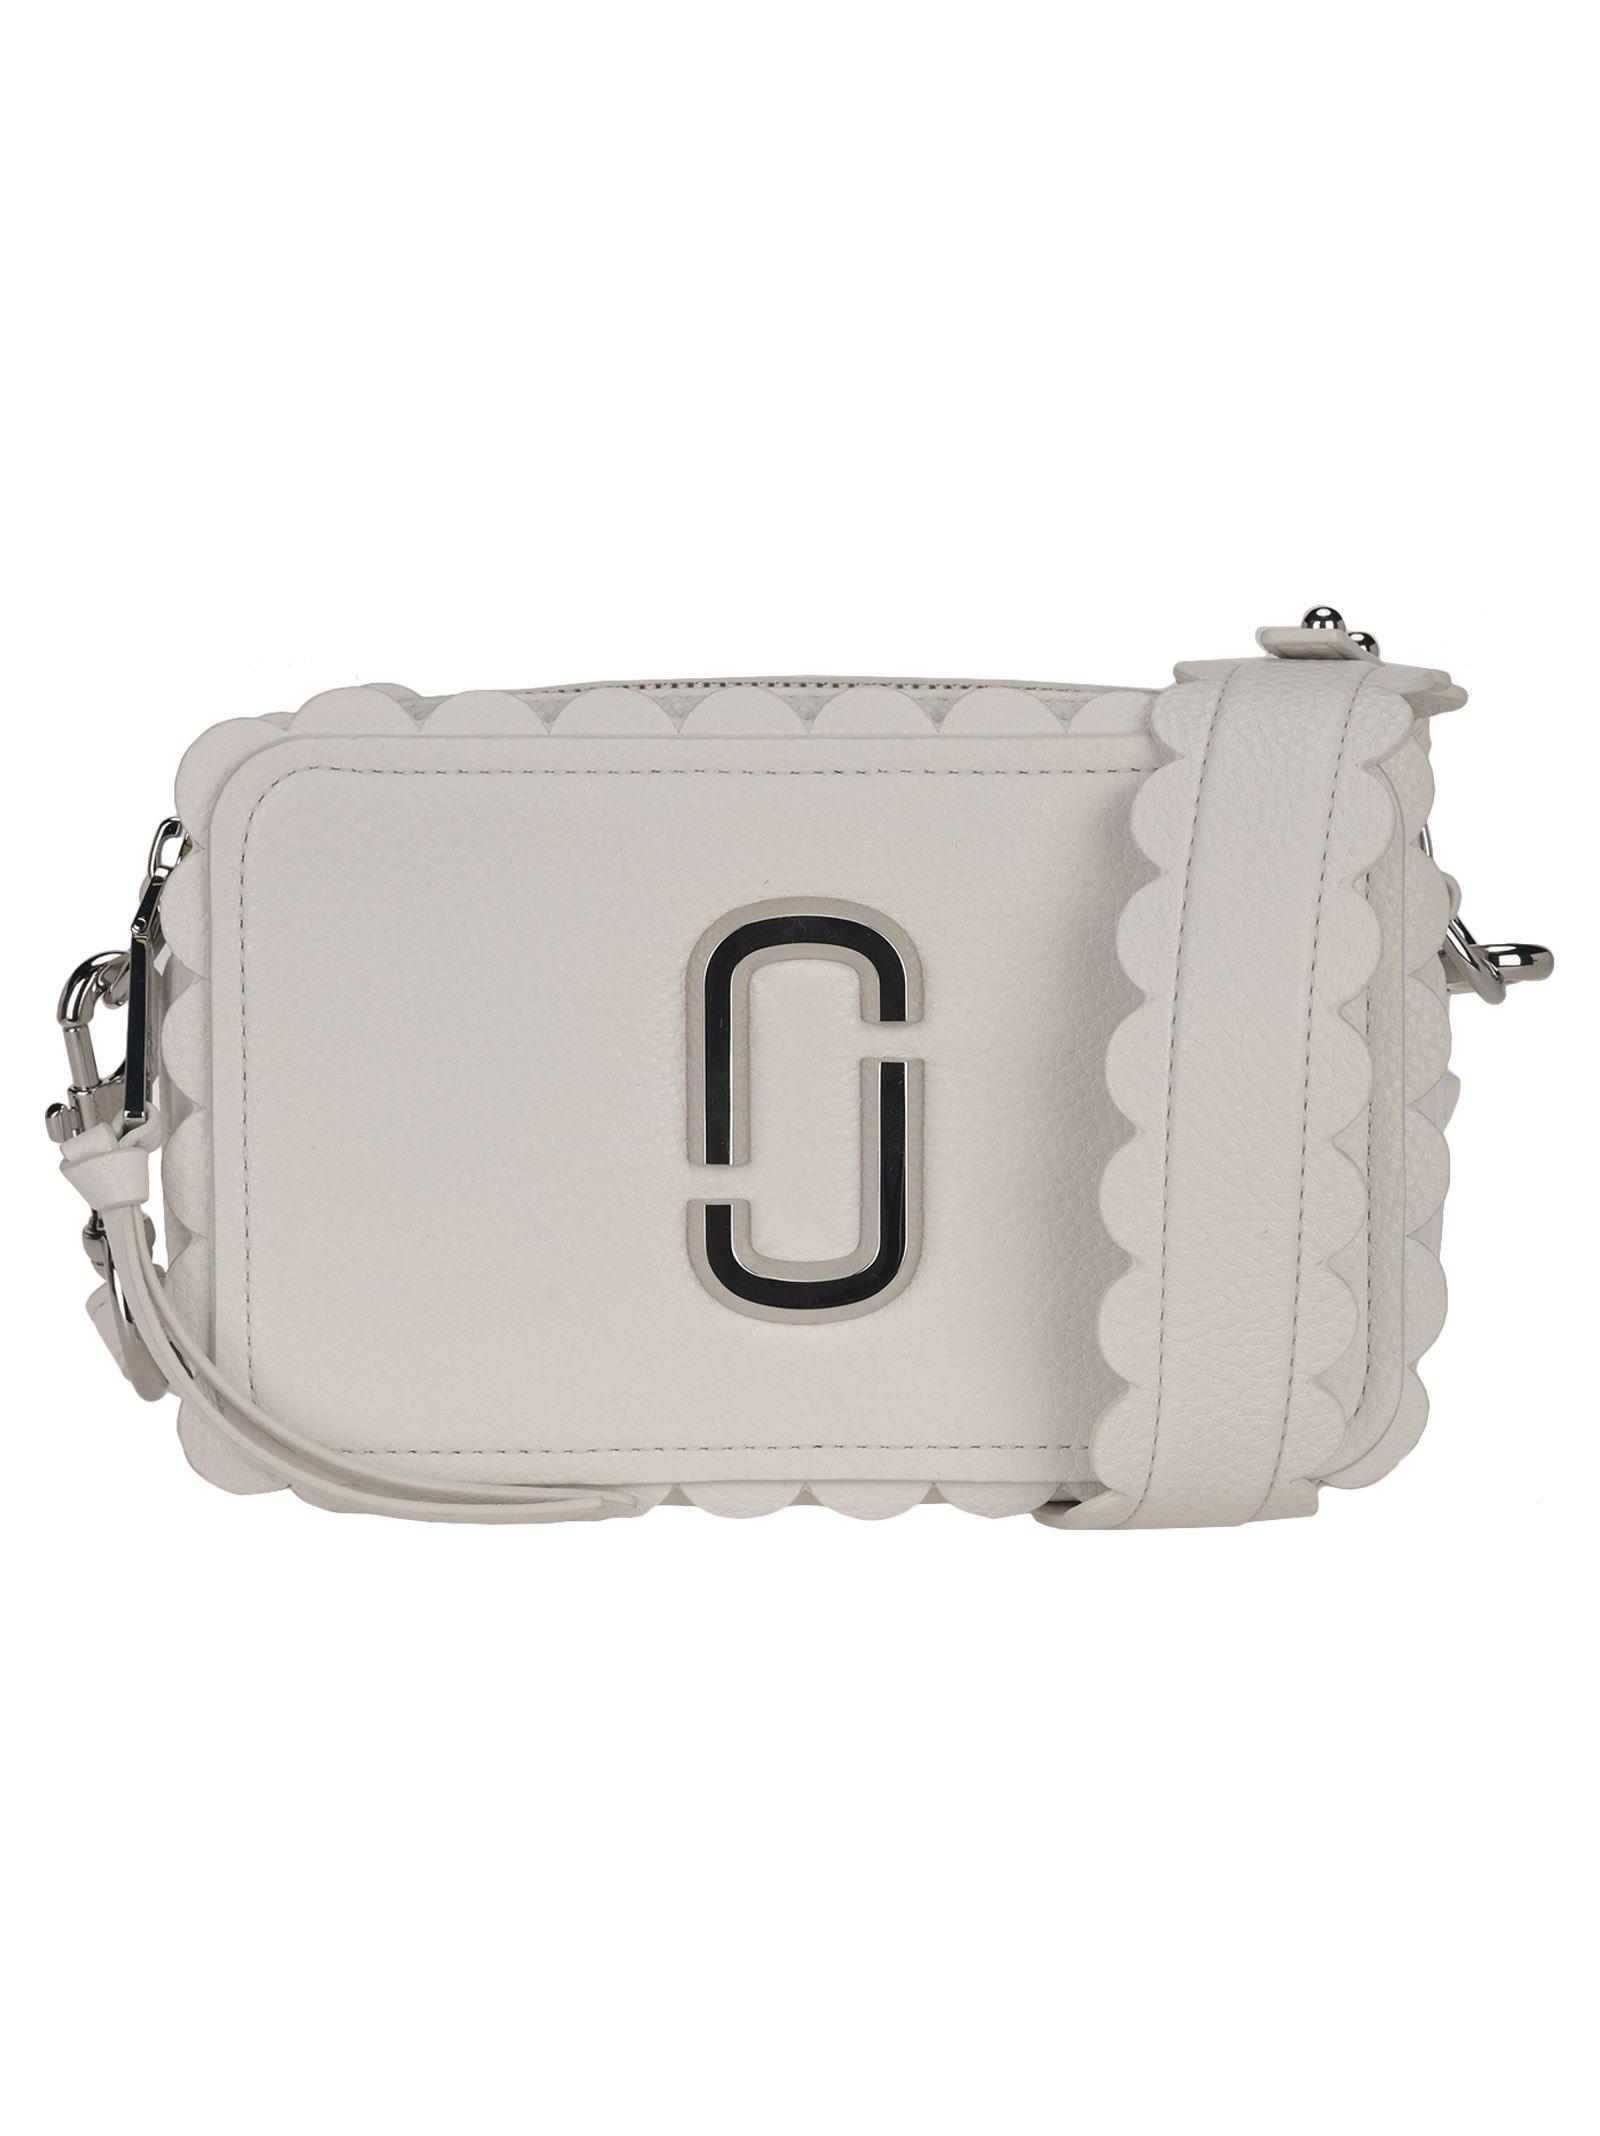 Marc Jacobs The Softshot Scalloped Crossbody Bag in White | Lyst